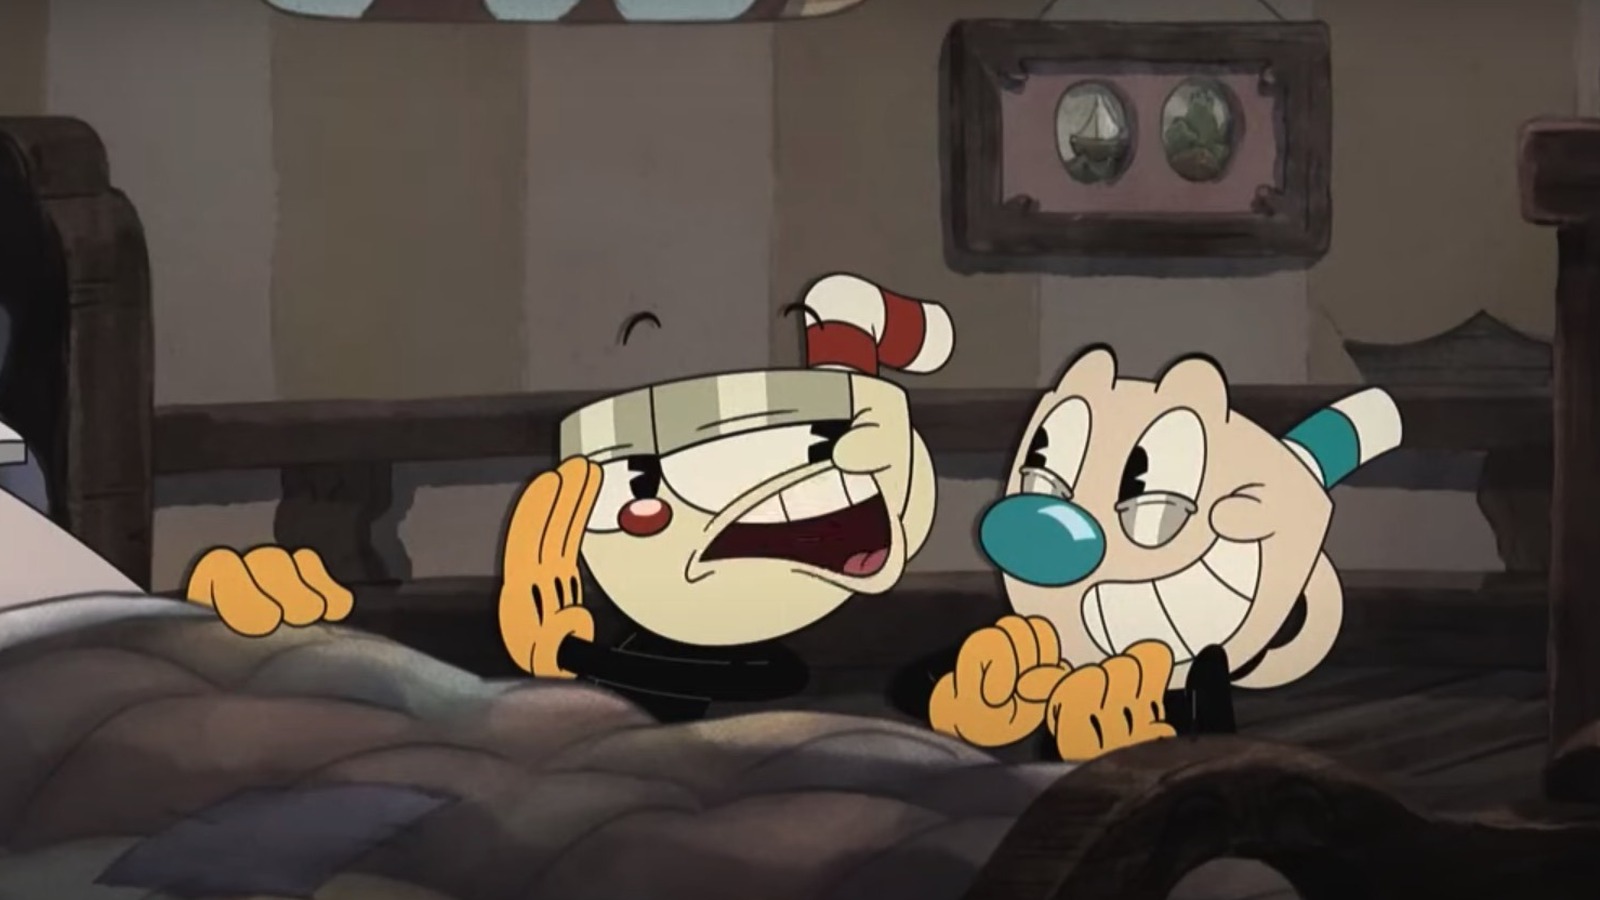 The Cuphead Show Season 2 Teaser, We're back! Mugsy, Ms. Chalice, and I  are excited to see you all August 19th, only on Netflix Geeked! See you  soon!! 🎲😈☕ #cuphead #cupheadshow